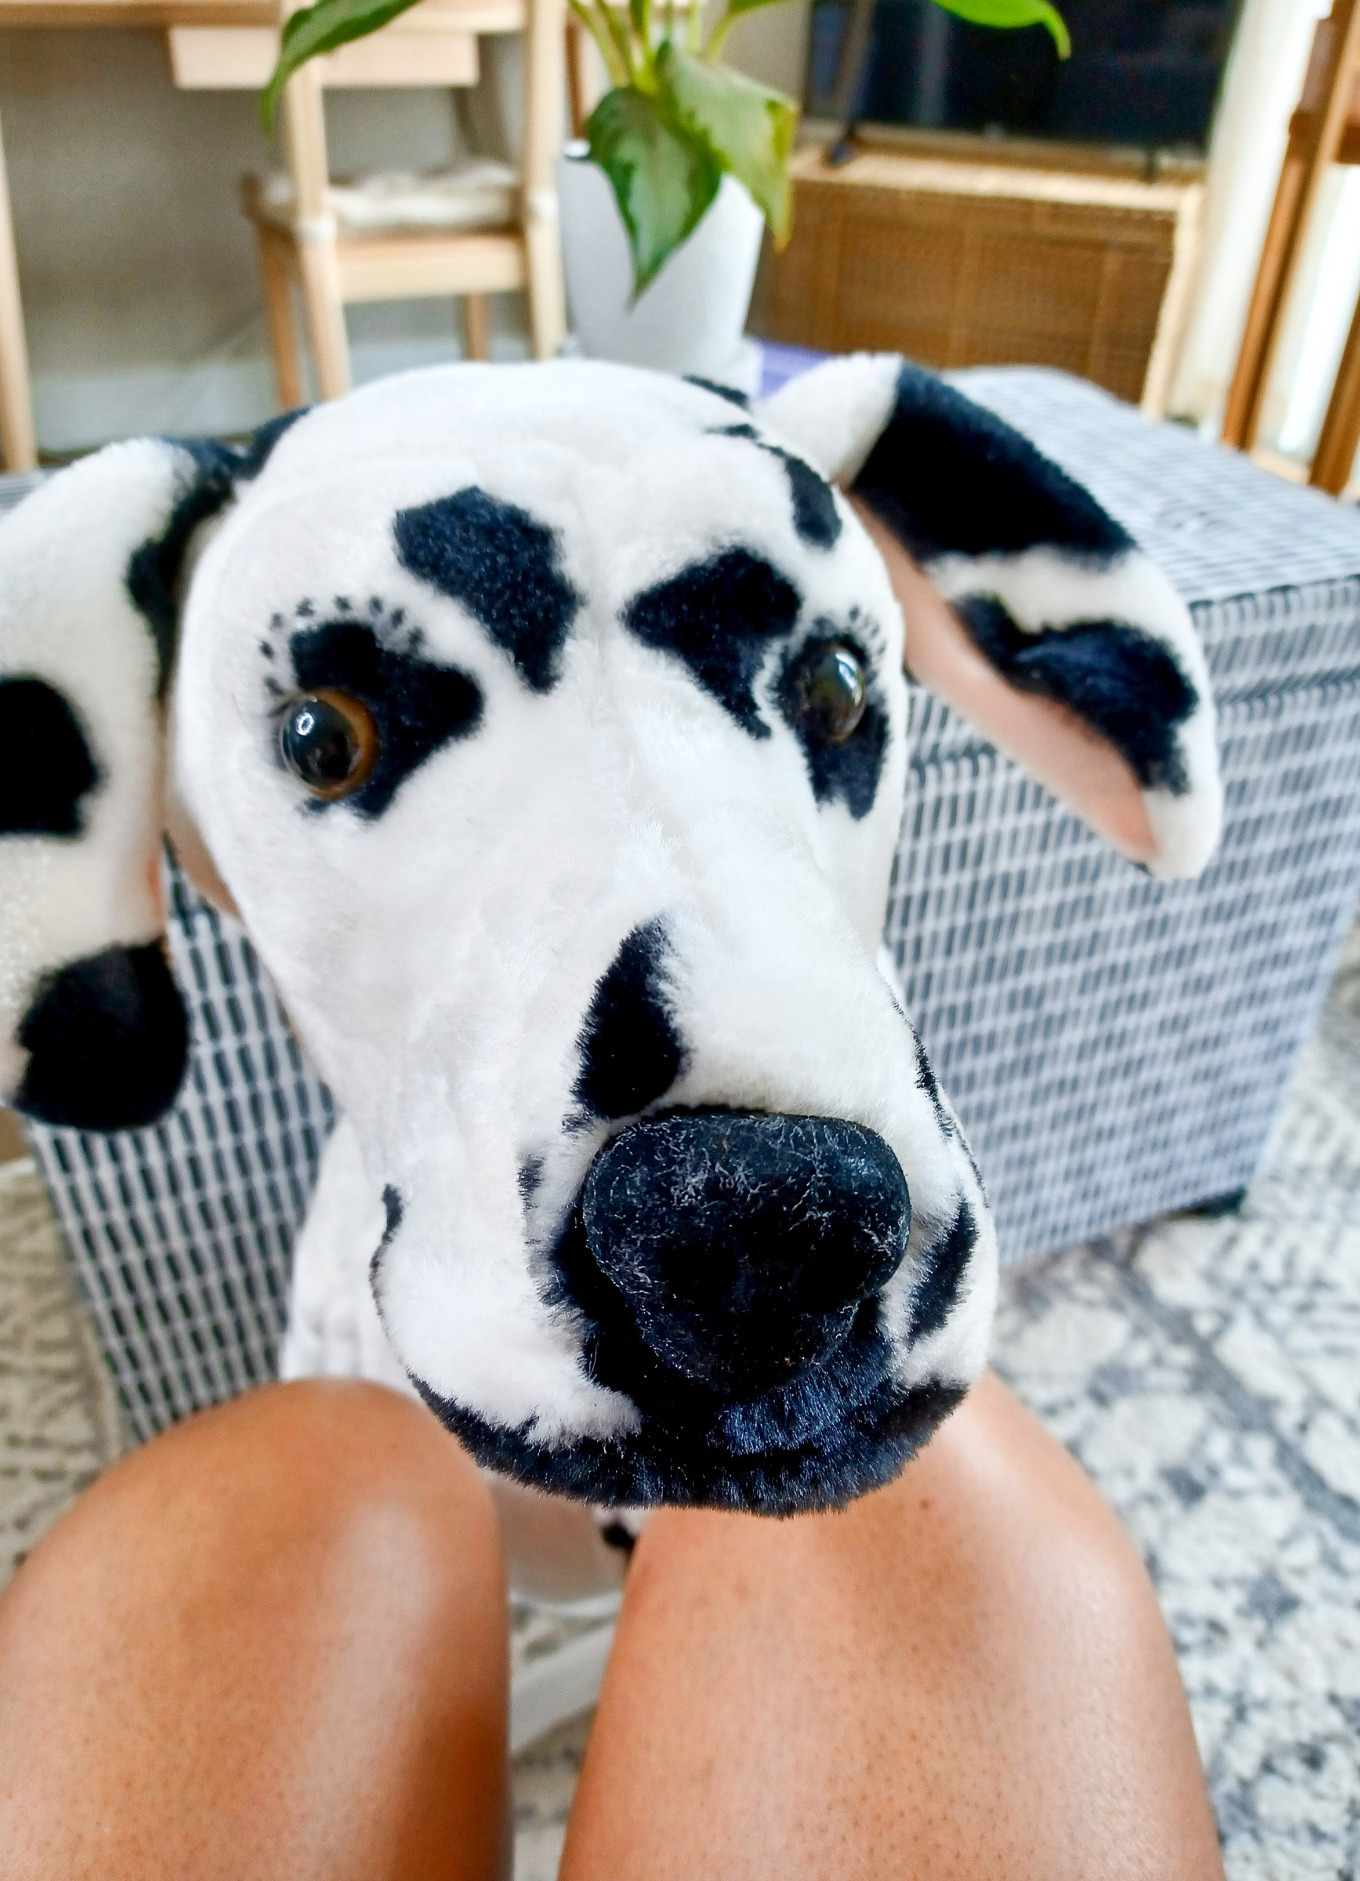 A Melissa and Doug Dalmatian is shown close up